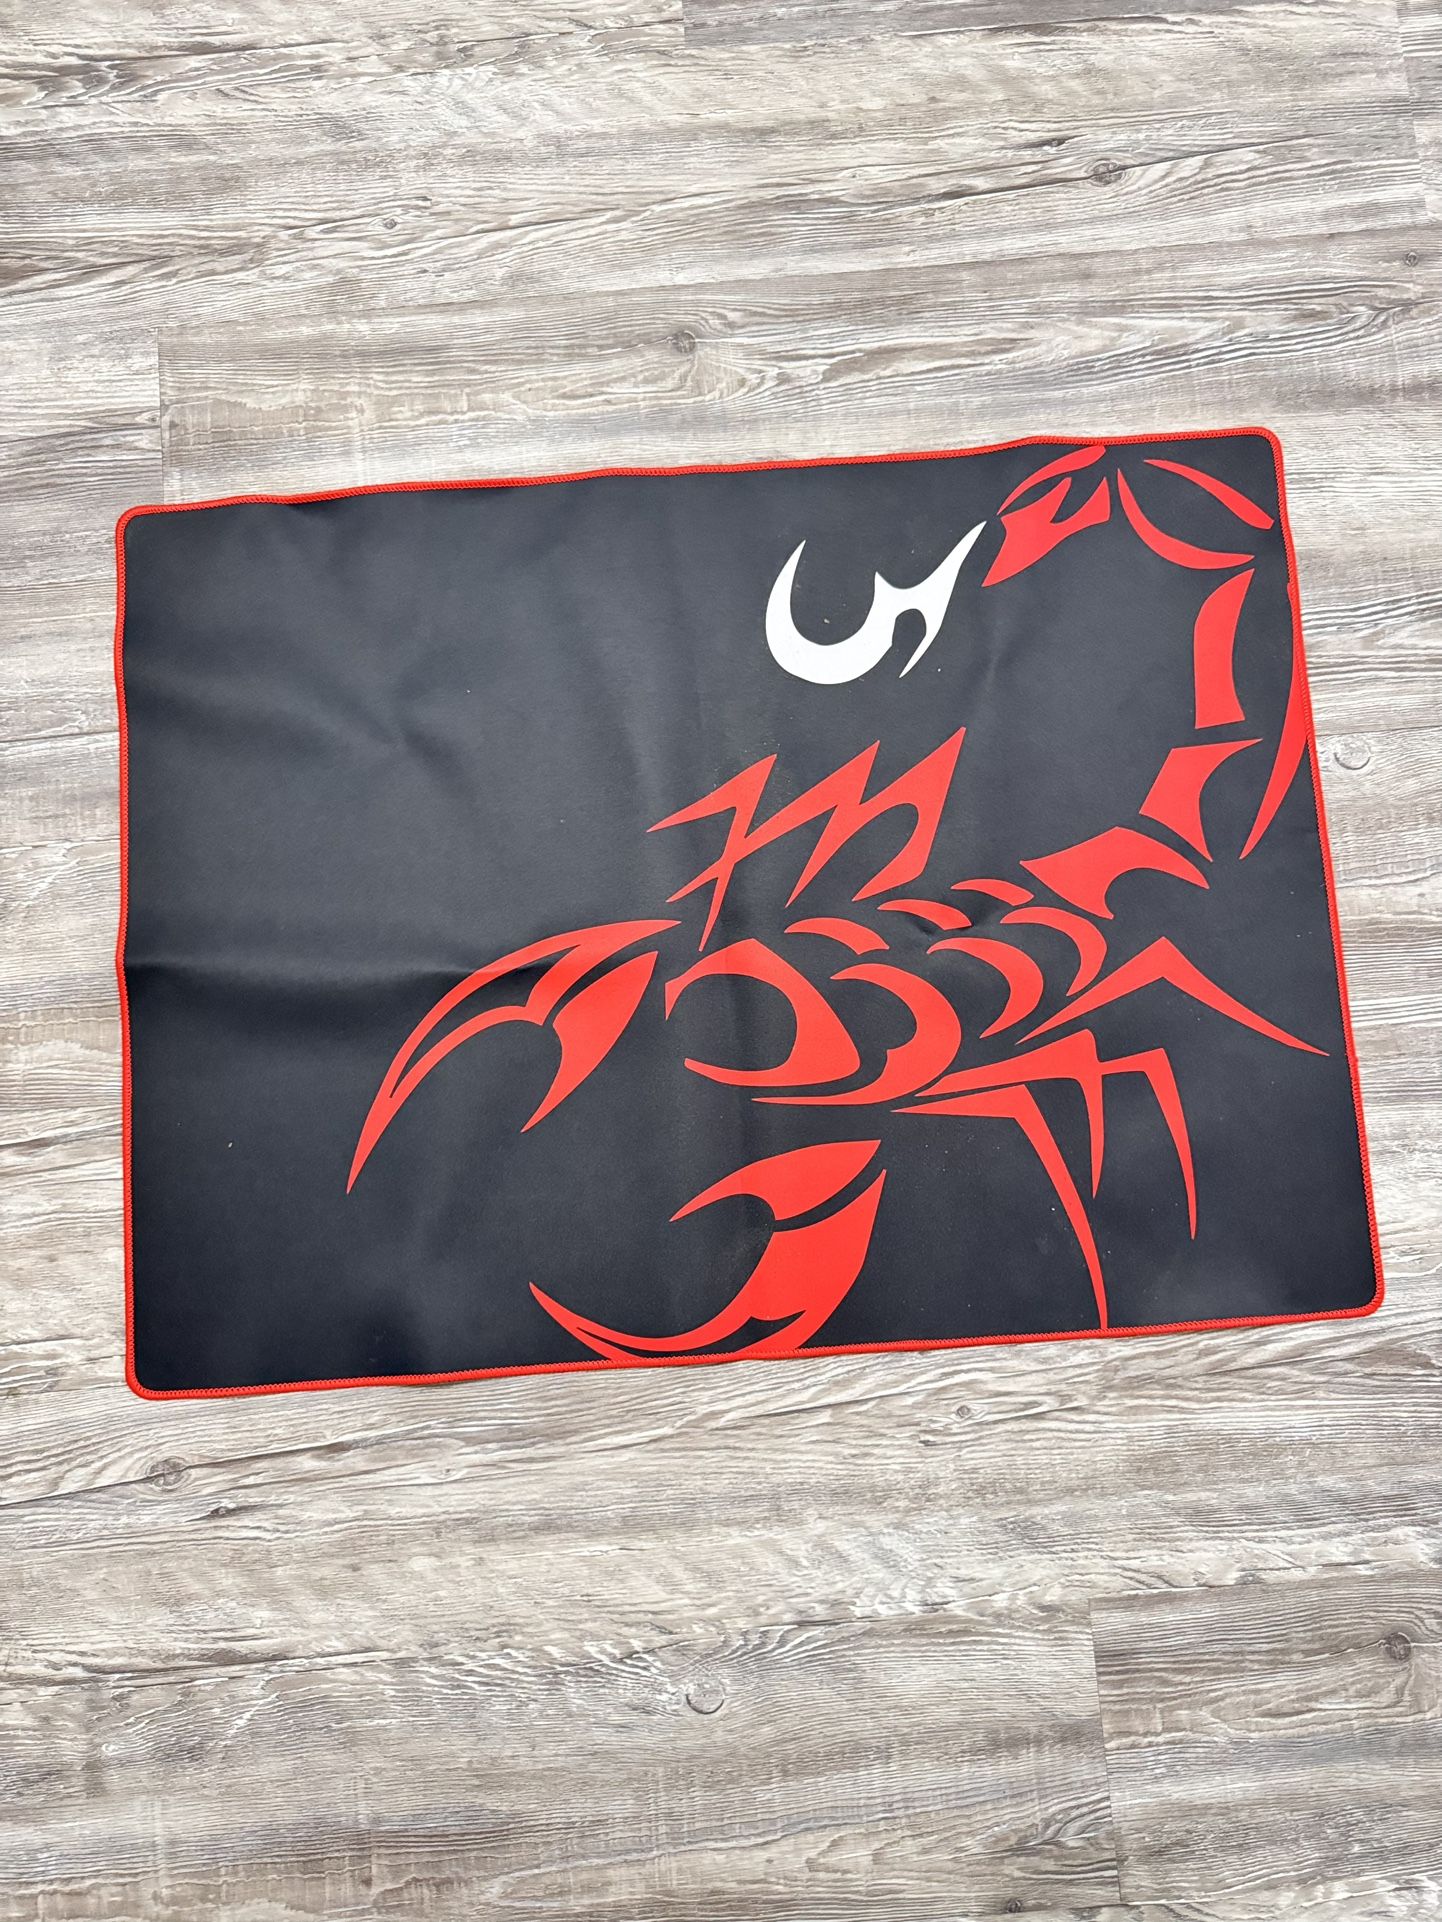 Large gamers mouse pad - 31x23 inches